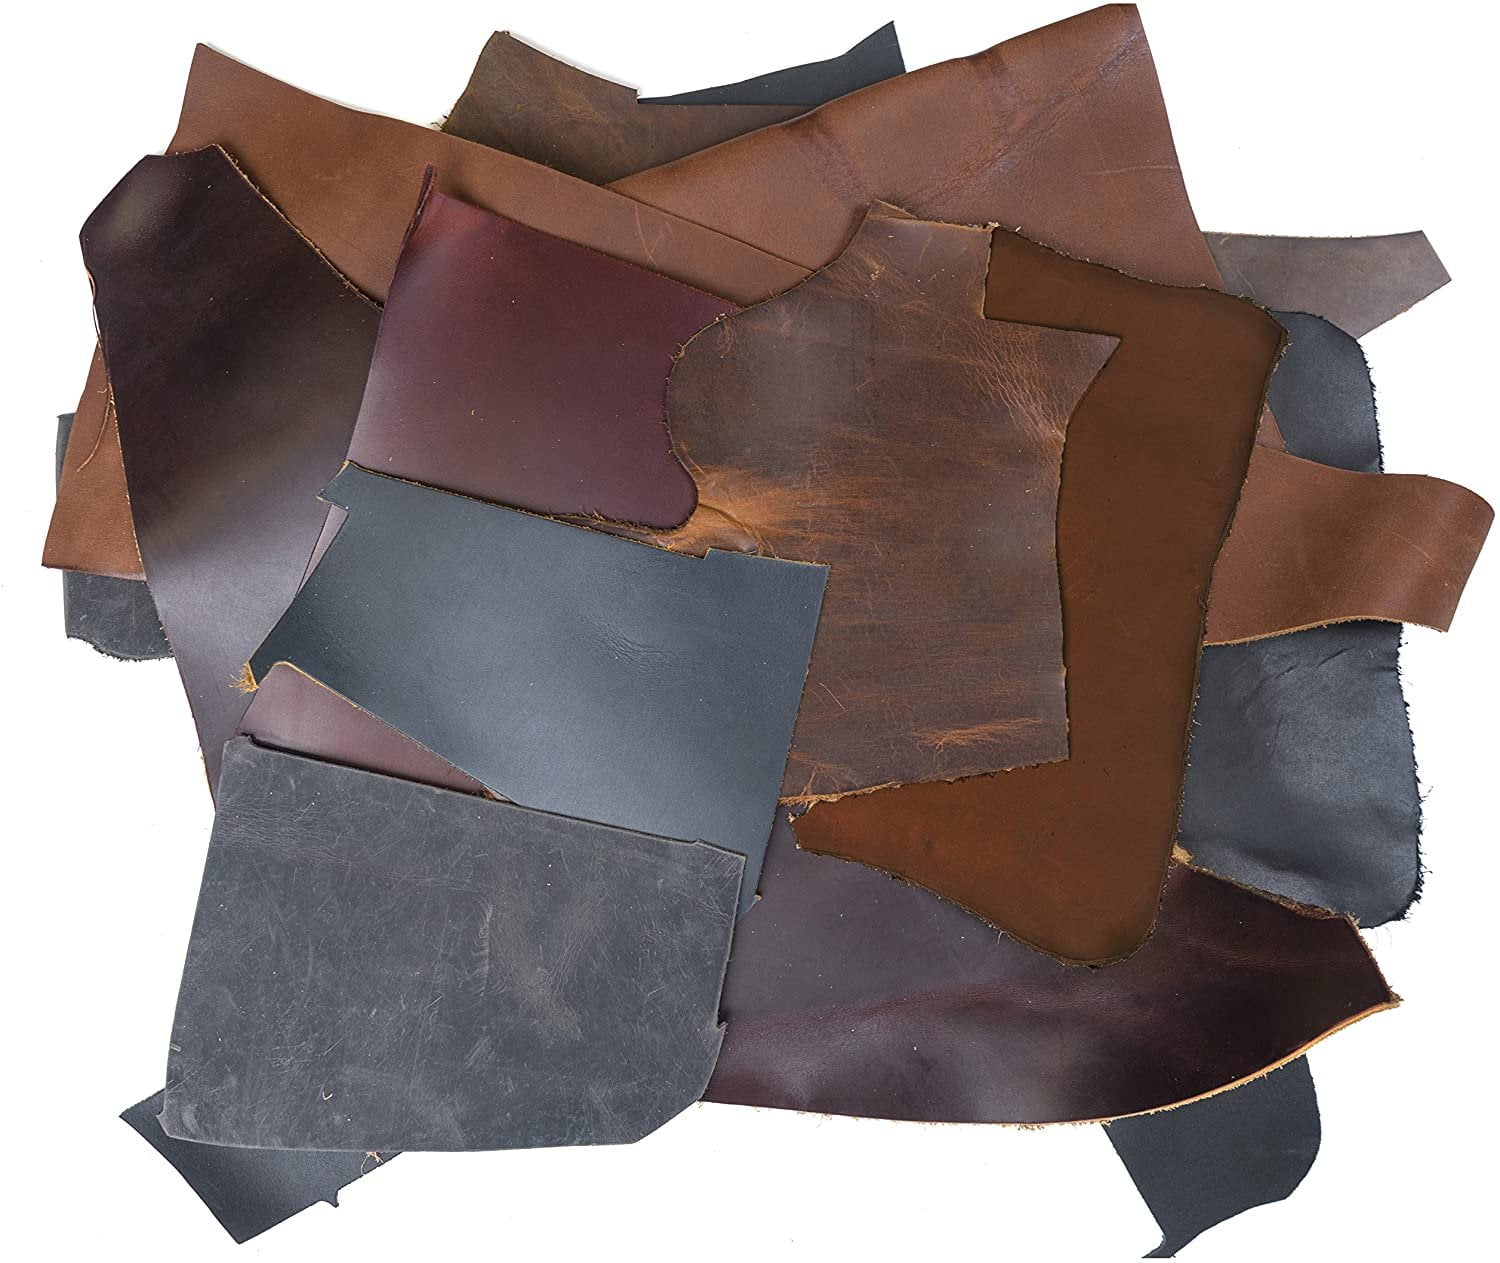 Upon Leather - Embossed and Printed Leather Scraps 1 Pound Medium & Large  Pieces | 6-7 Square Feet Cowhide remnants for Crafts, Earrings, Jewelry 